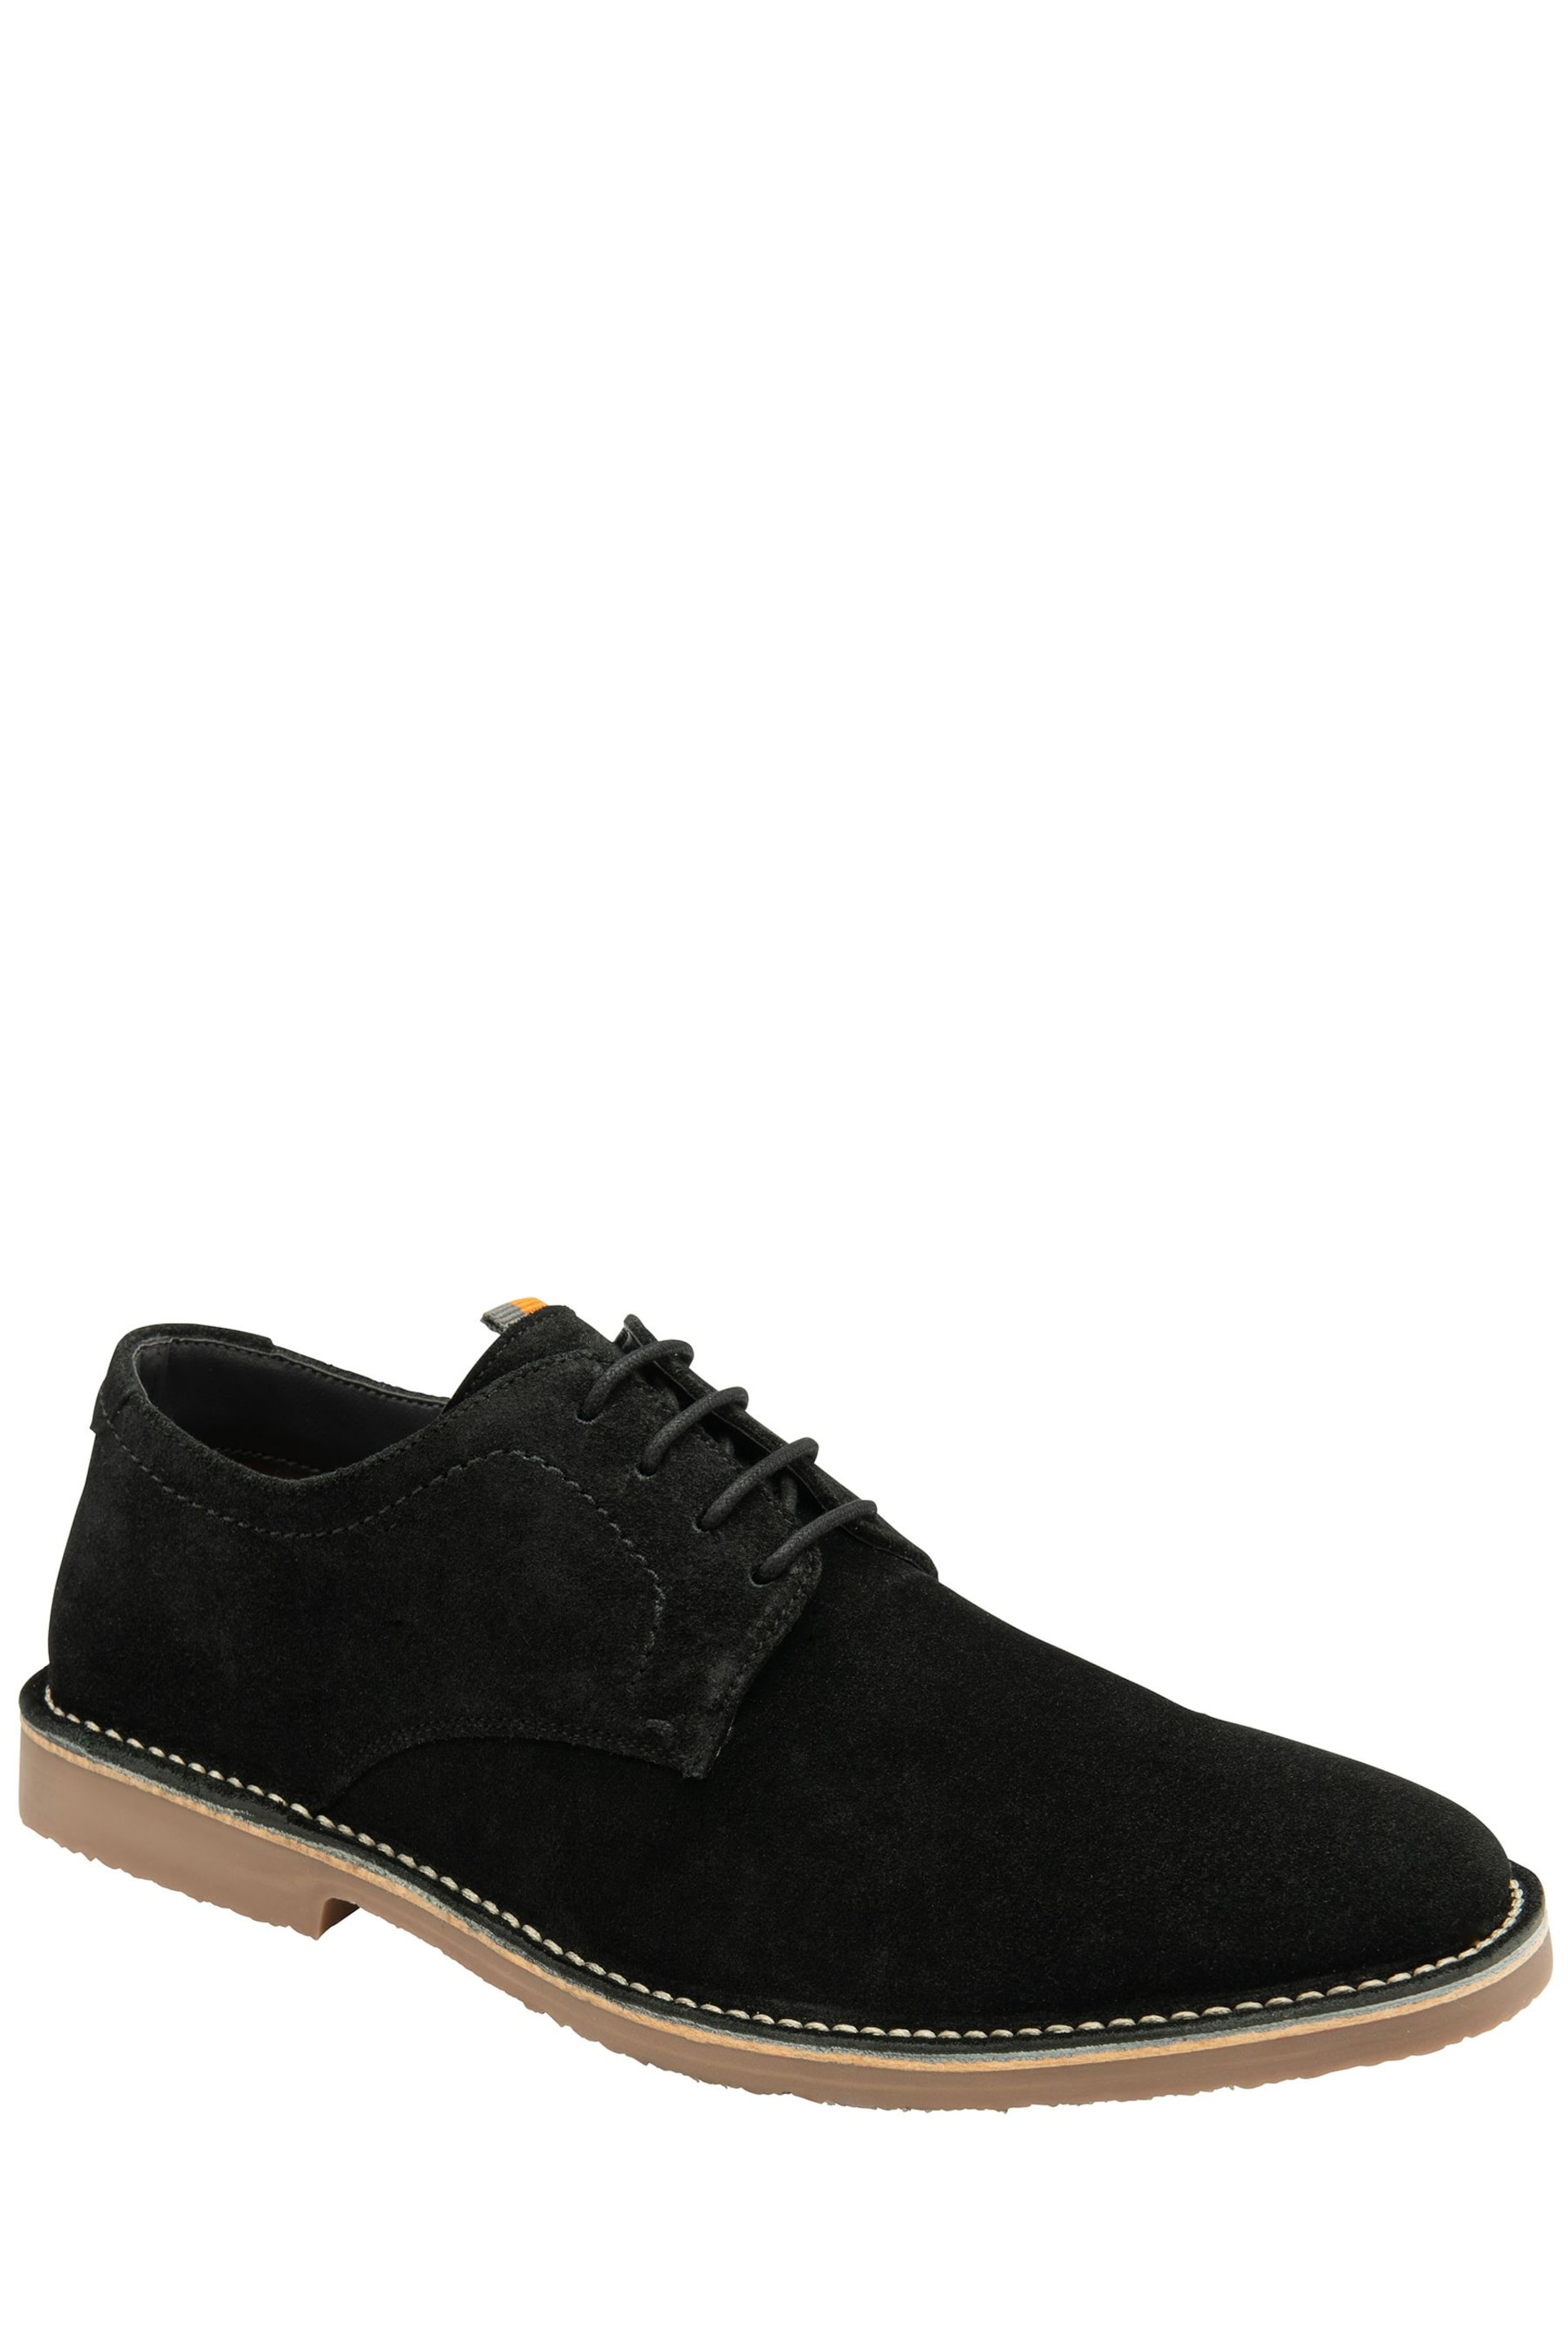 Frank Wright Black Suede Lace-Up Desert Mens Shoes - Image 1 of 4